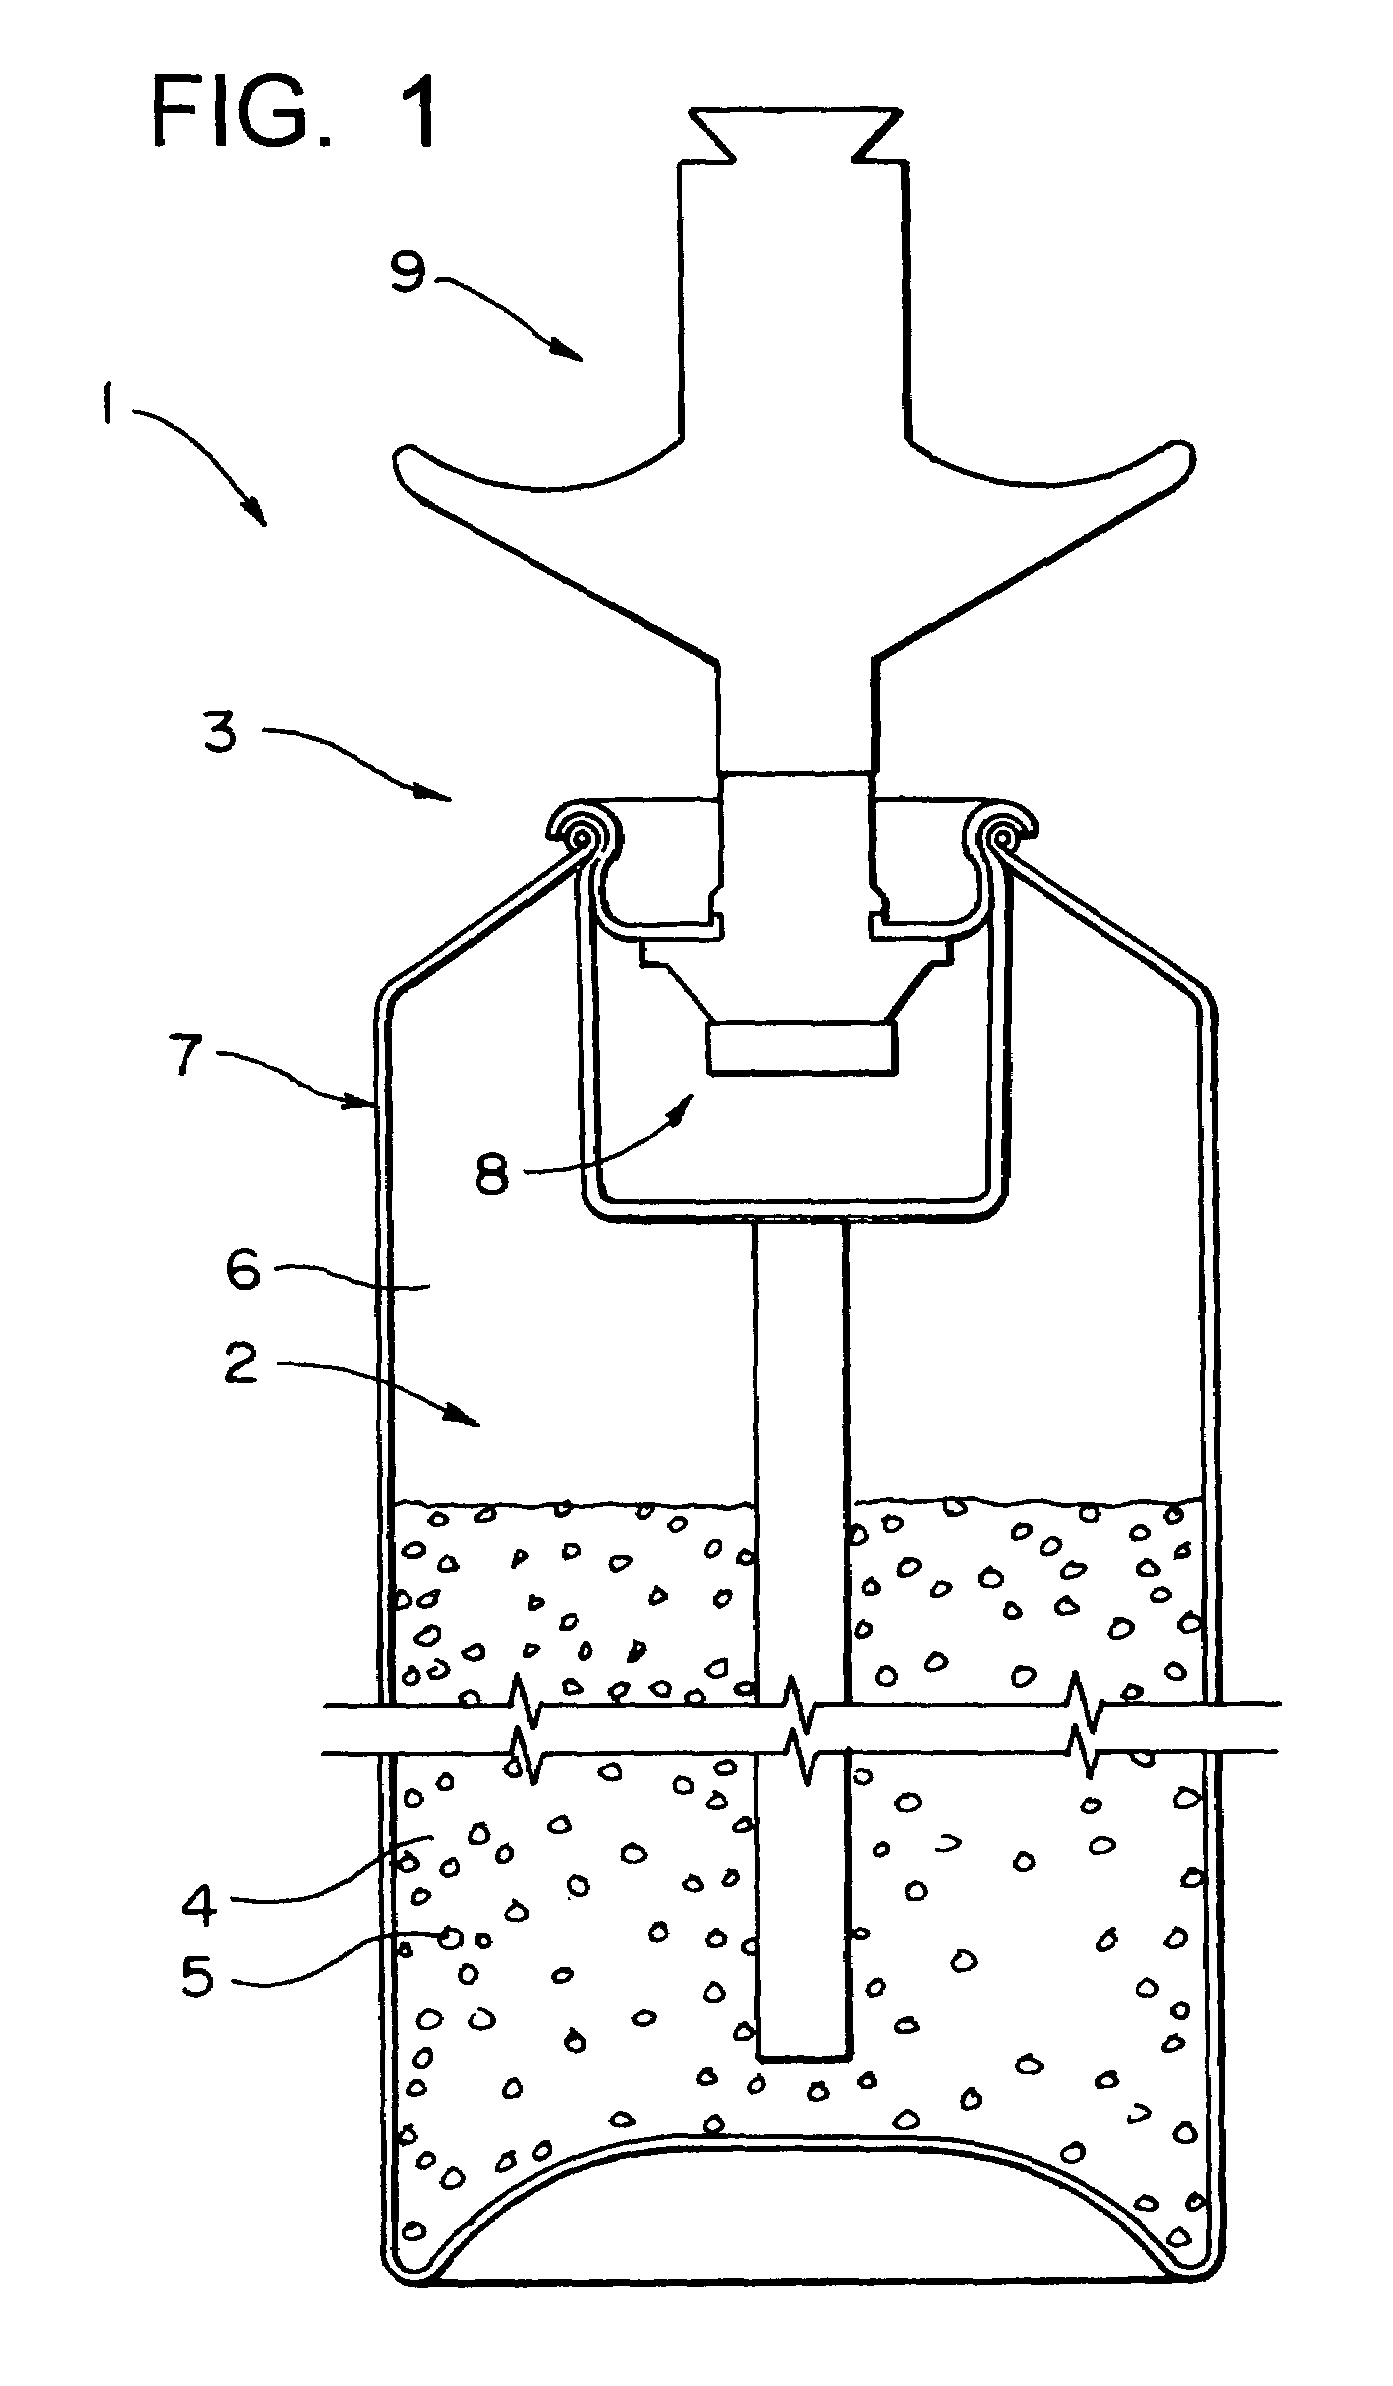 Aerosol spray texture apparatus for a particulate containing material